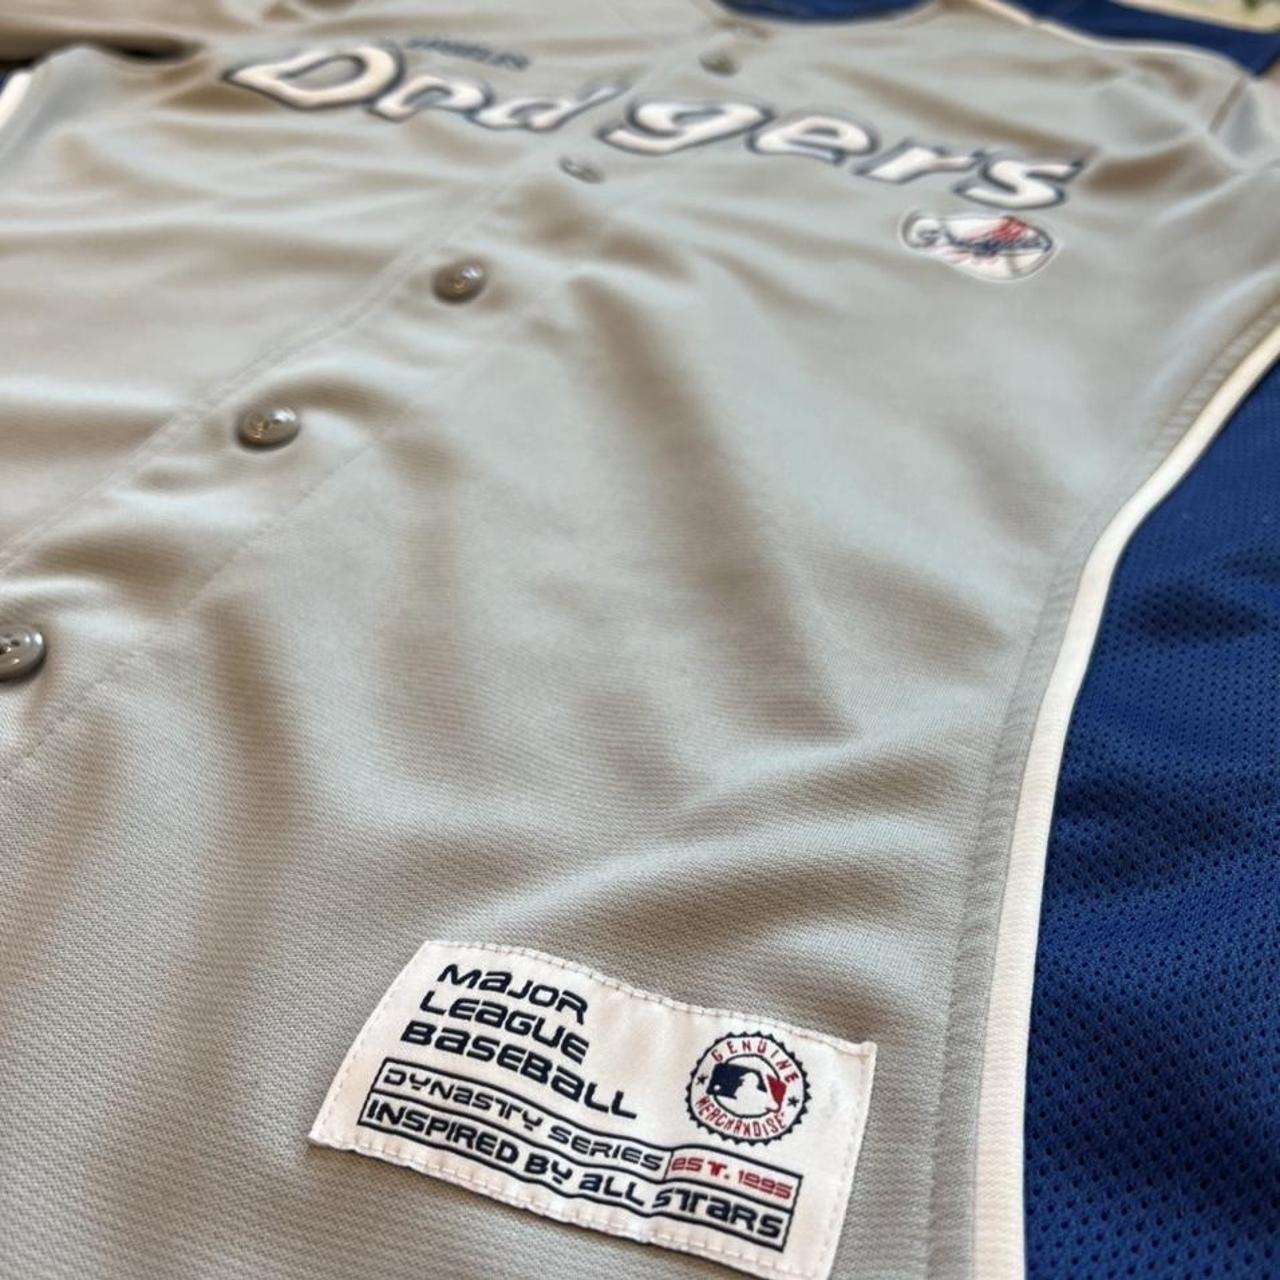 Product Image 2 - Dodgers Jersey (M)
- $25 +